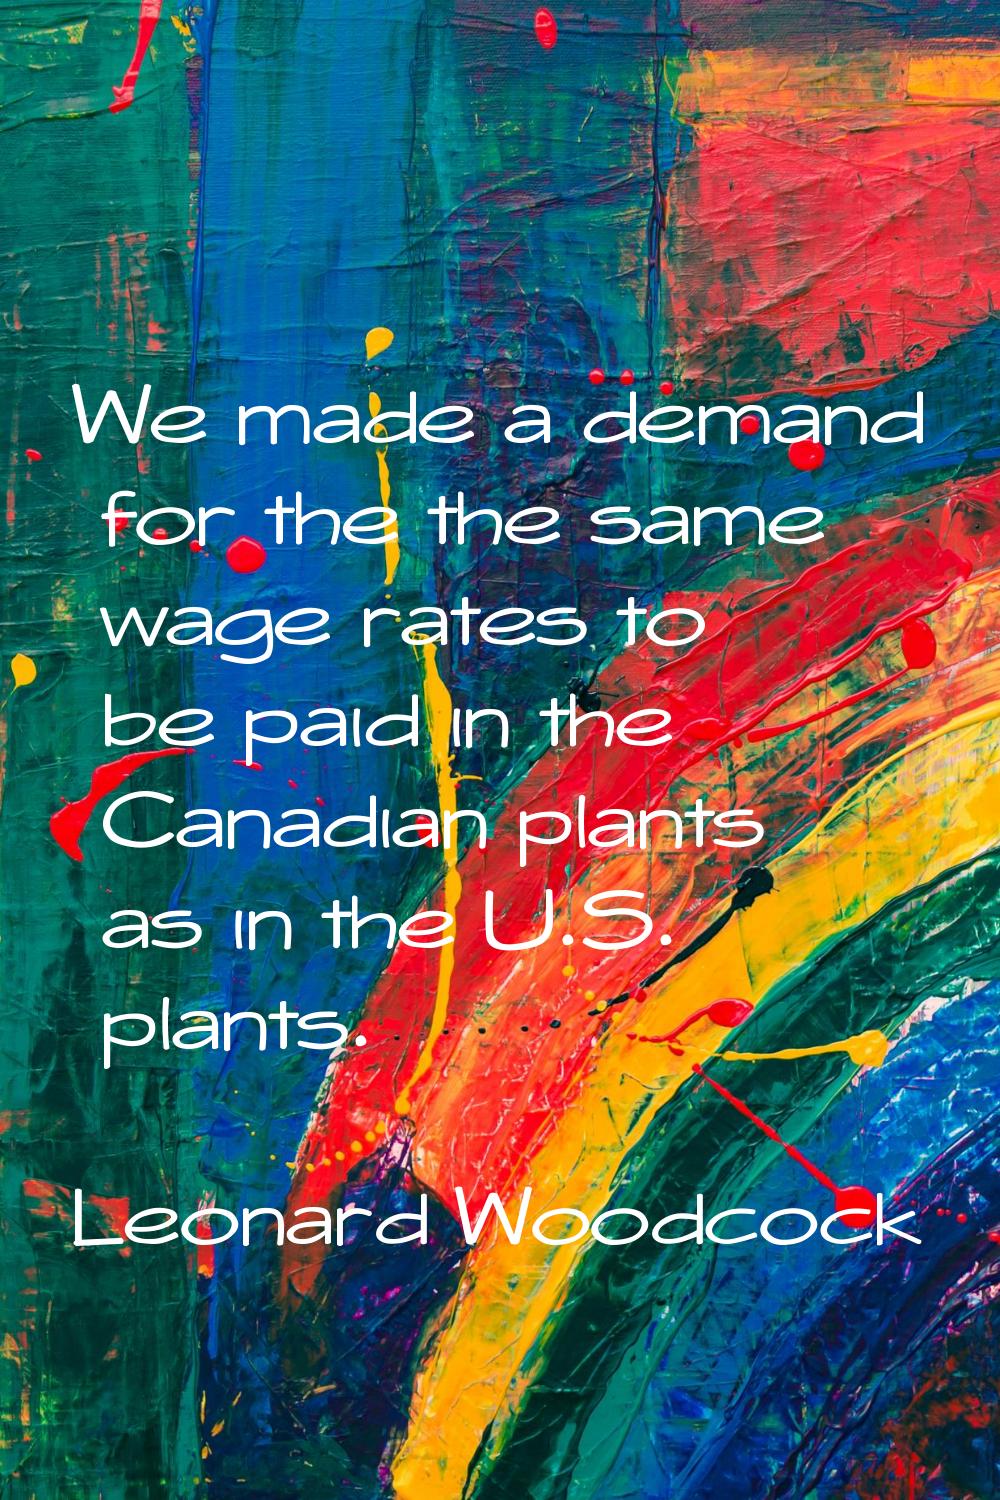 We made a demand for the the same wage rates to be paid in the Canadian plants as in the U.S. plant